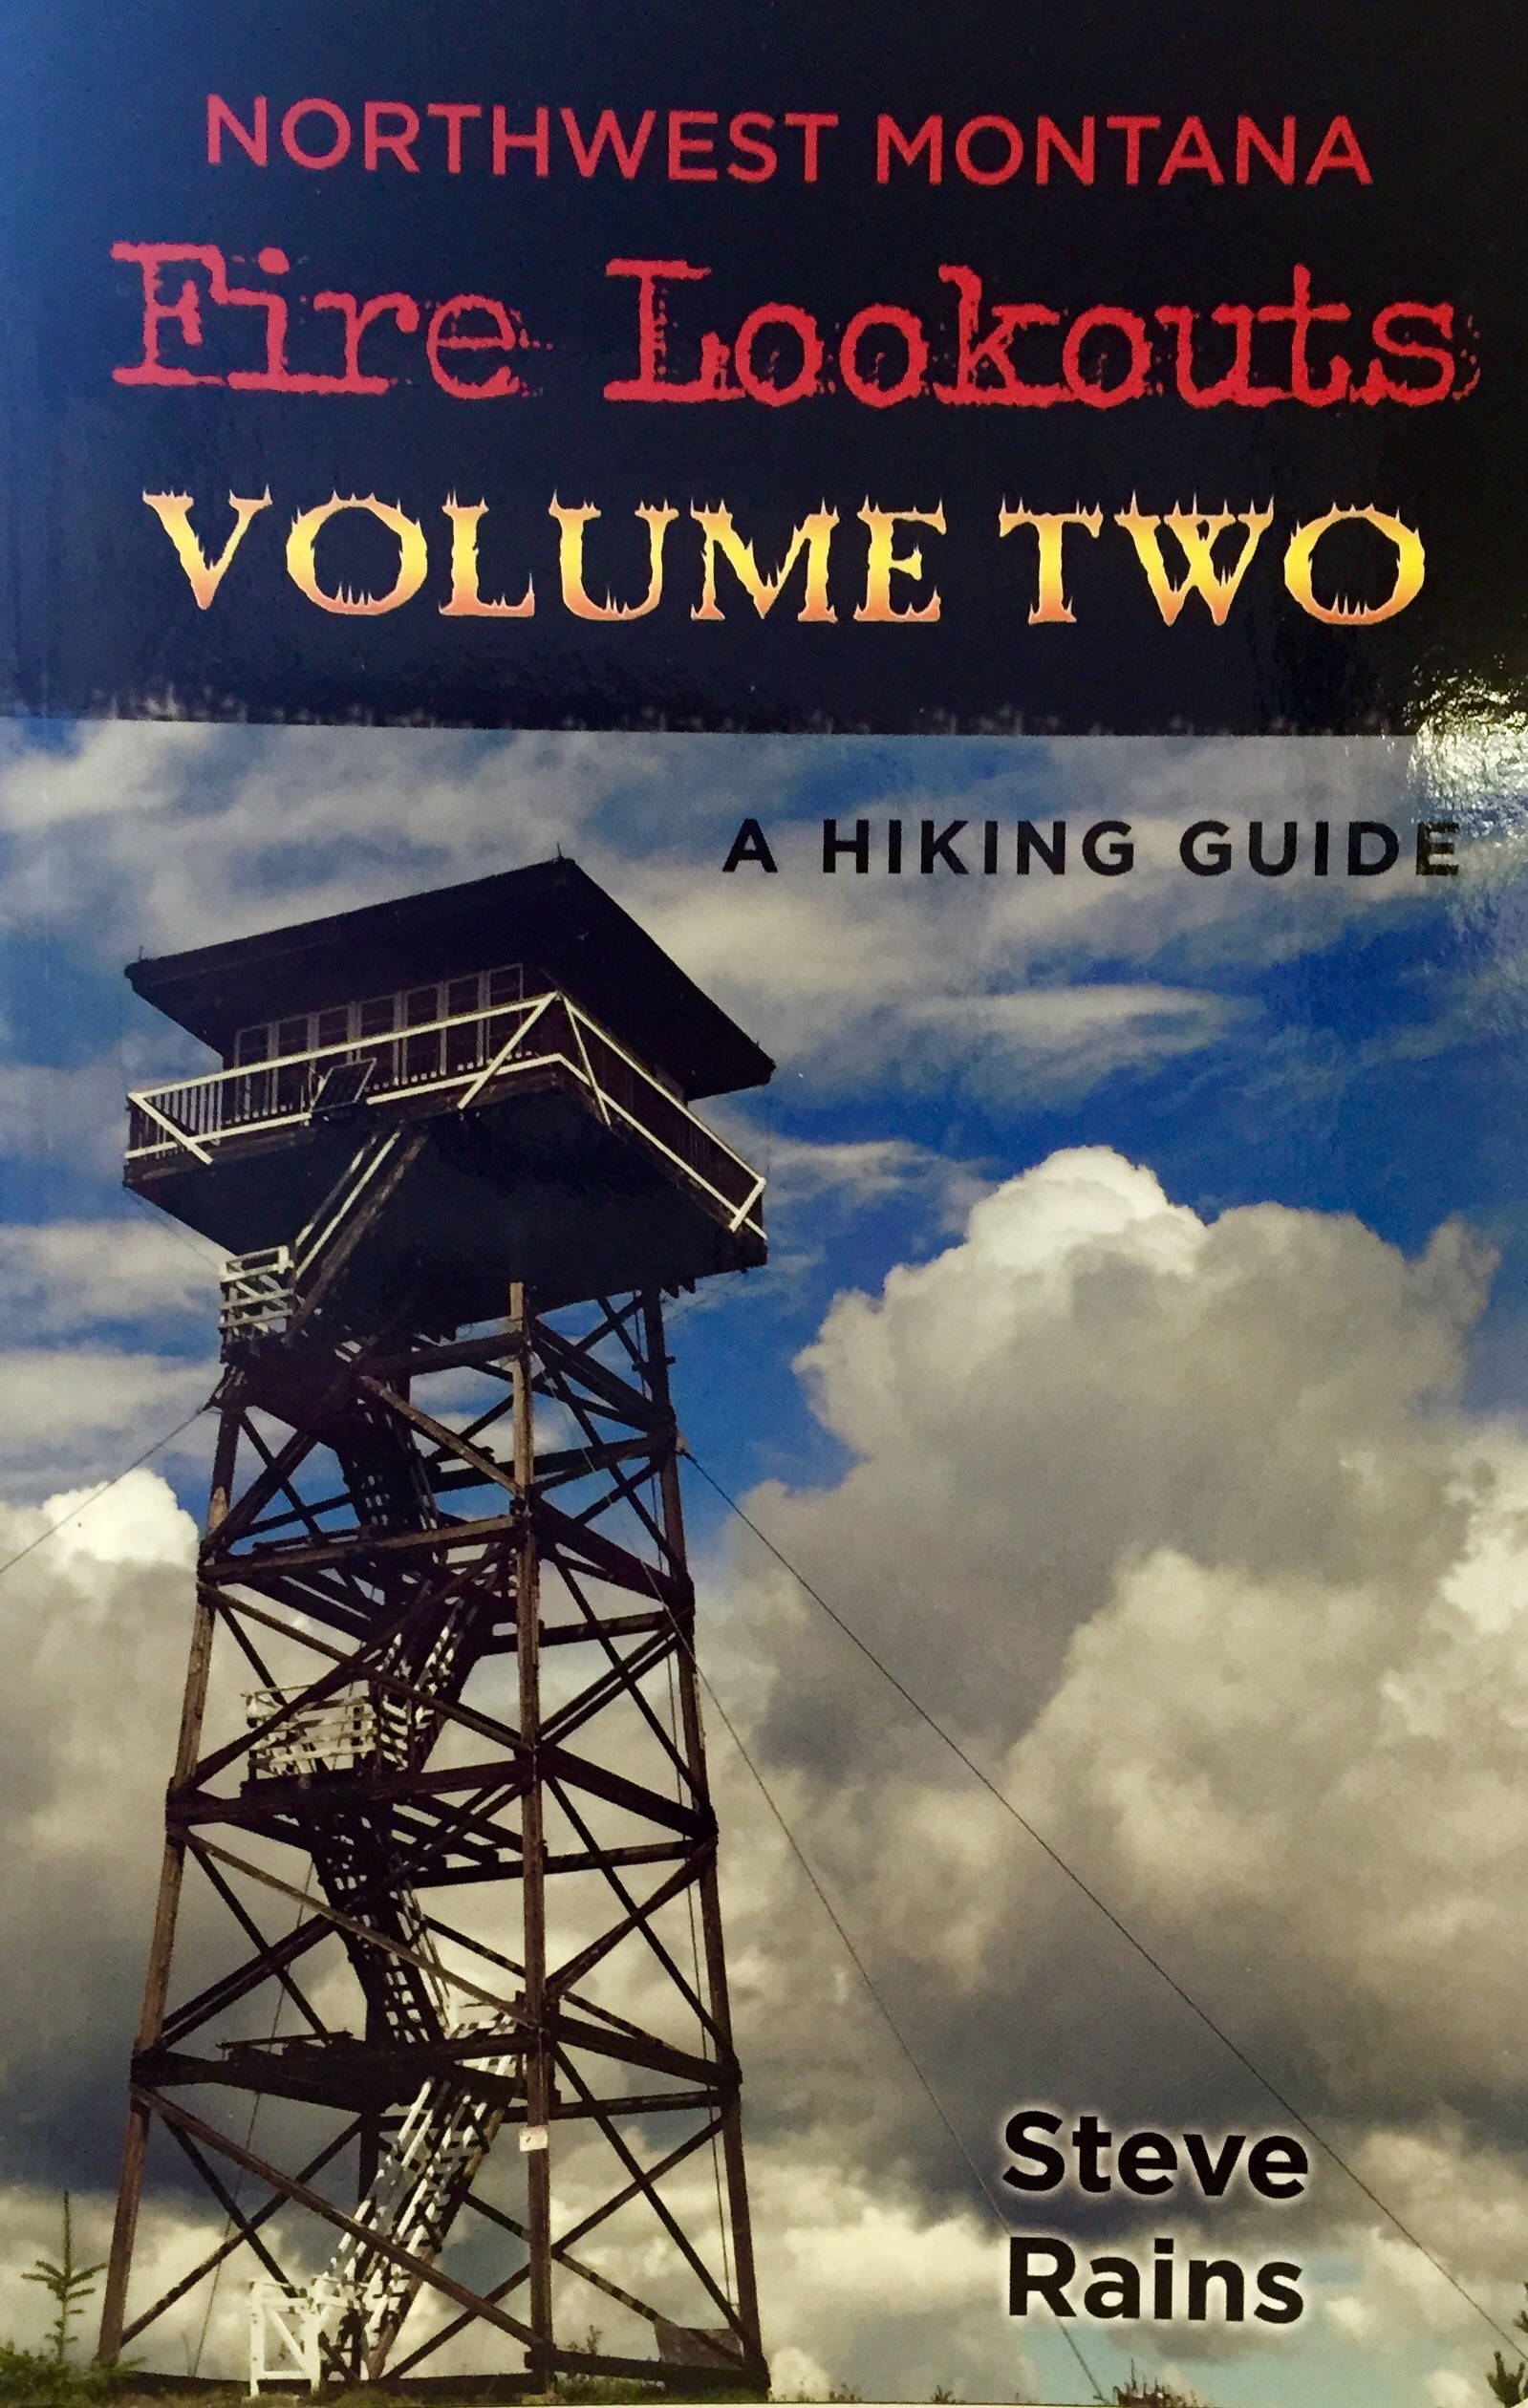 Northwest Montana Fire Lookouts Volume Two